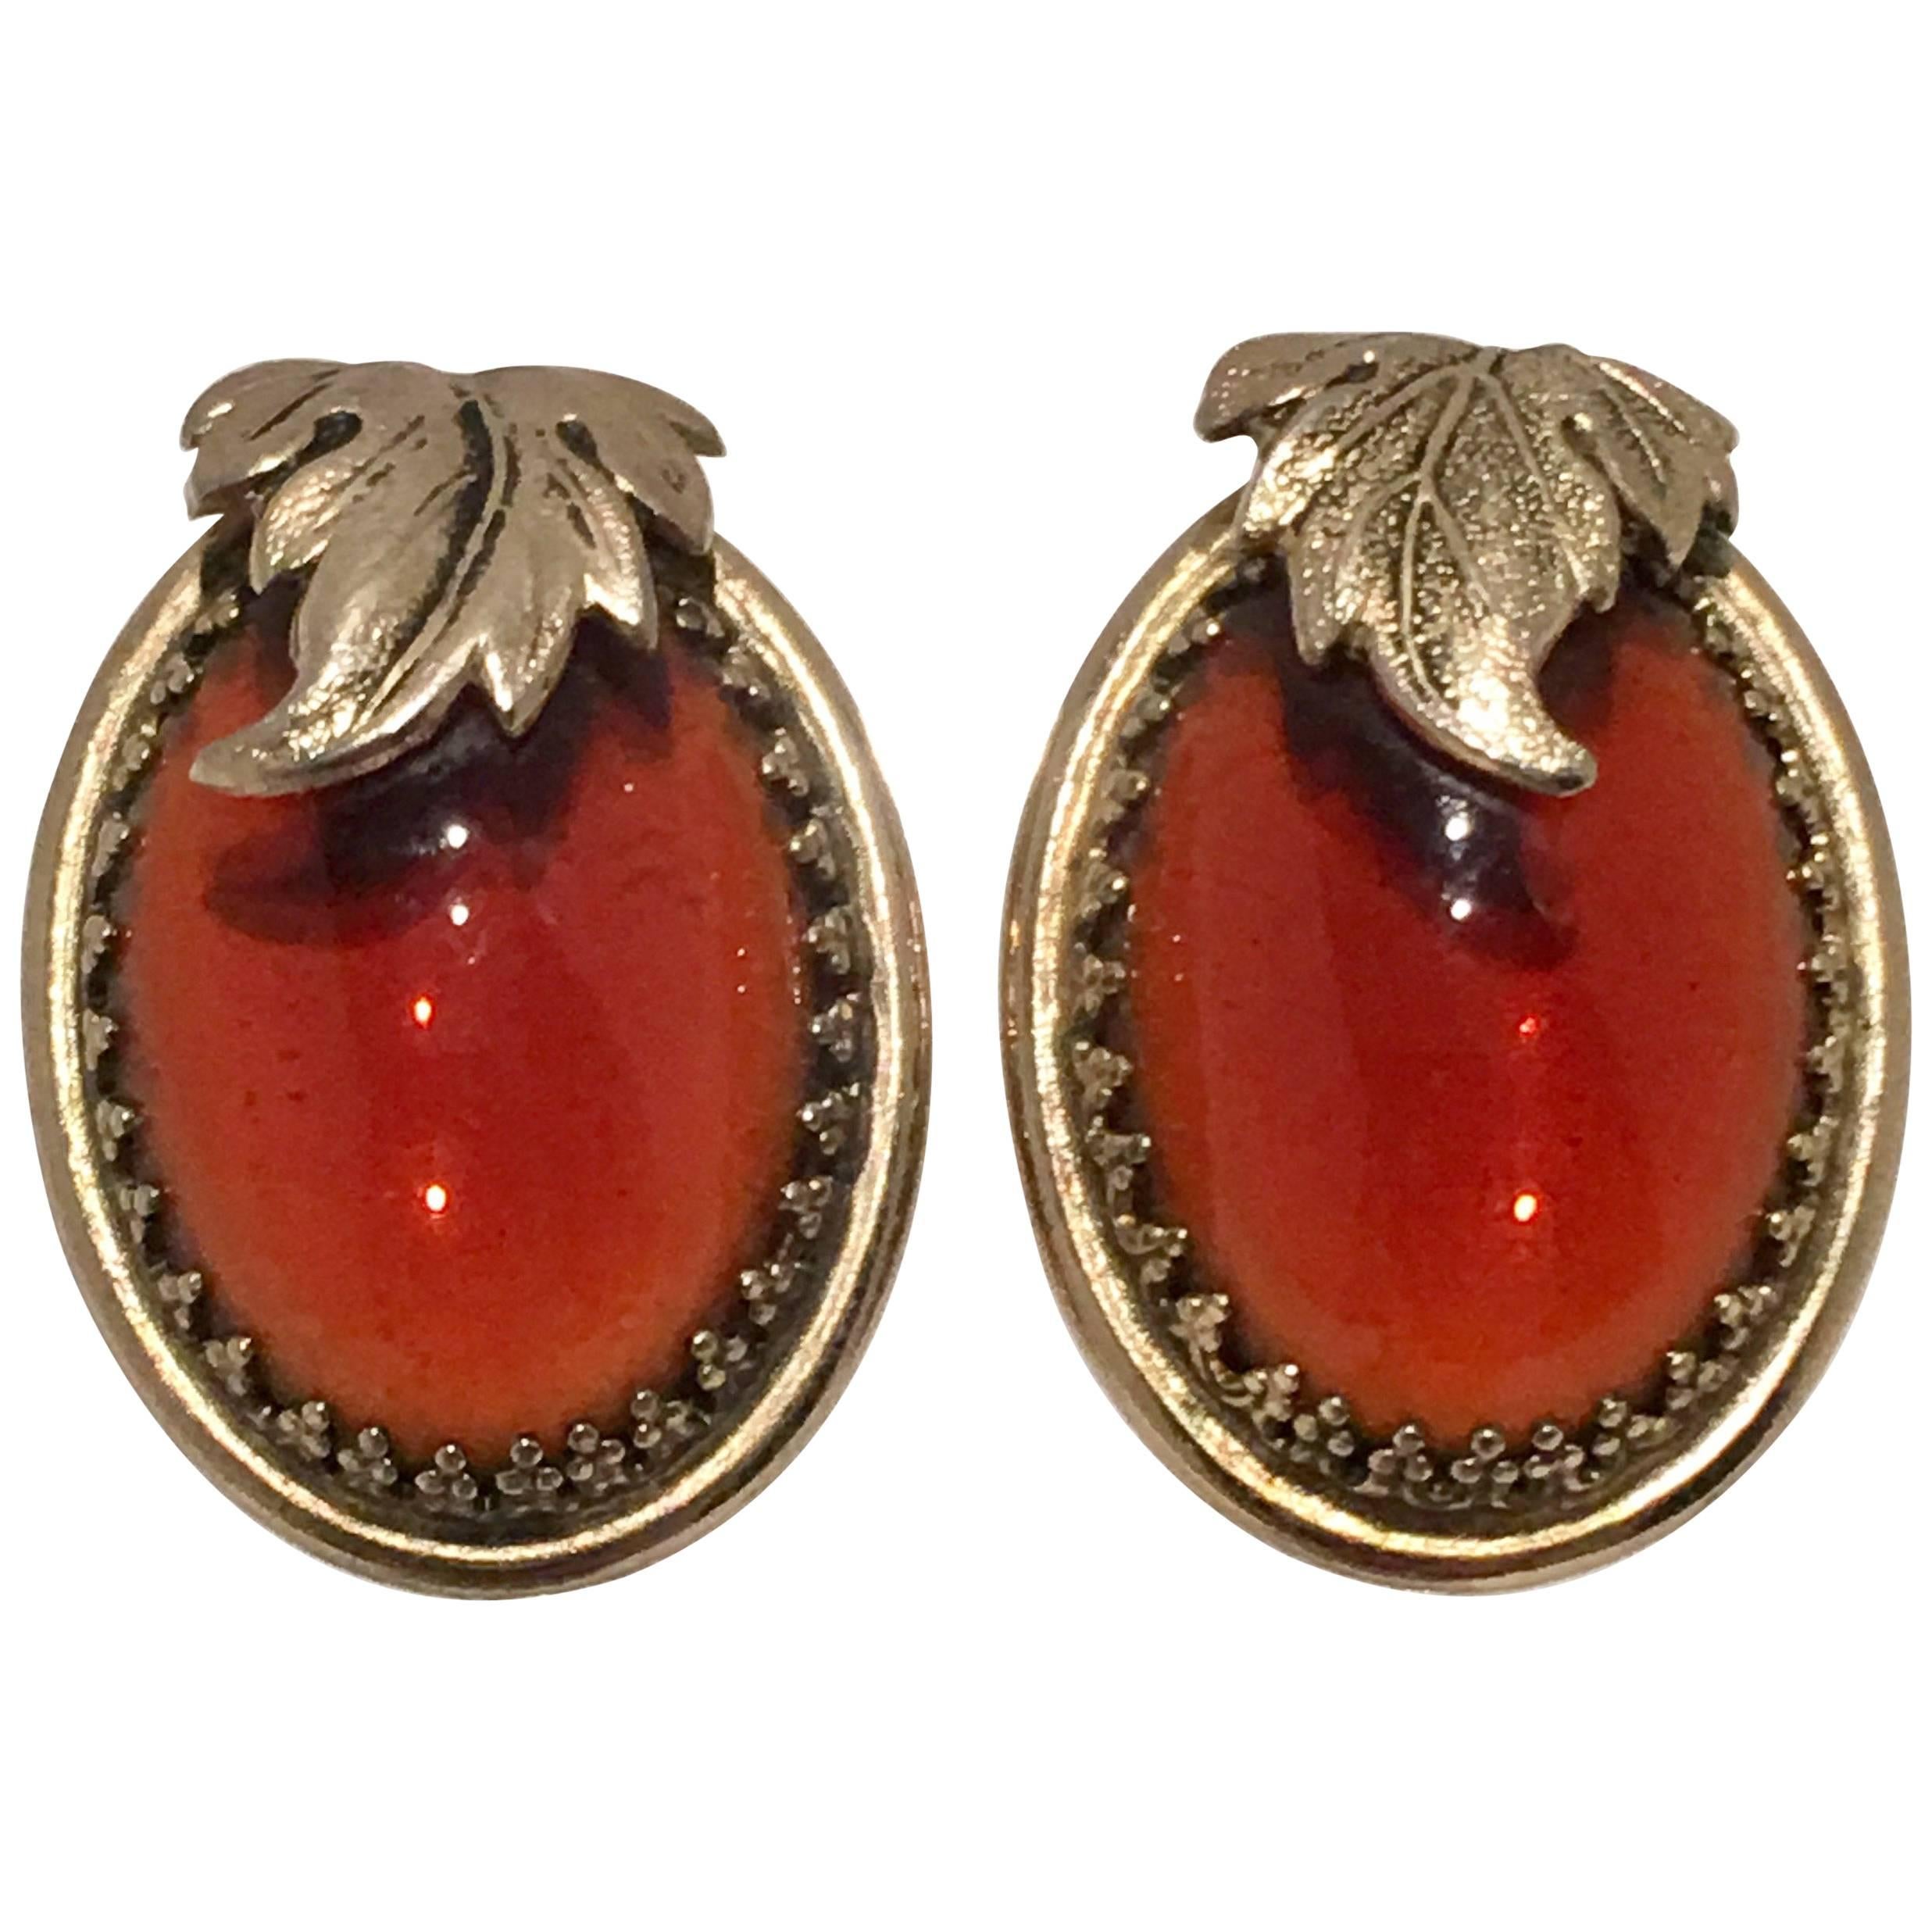 Vintage Art Nouveau Style Gold & Amber Art Glass Earrings By, Whiting & Davis For Sale